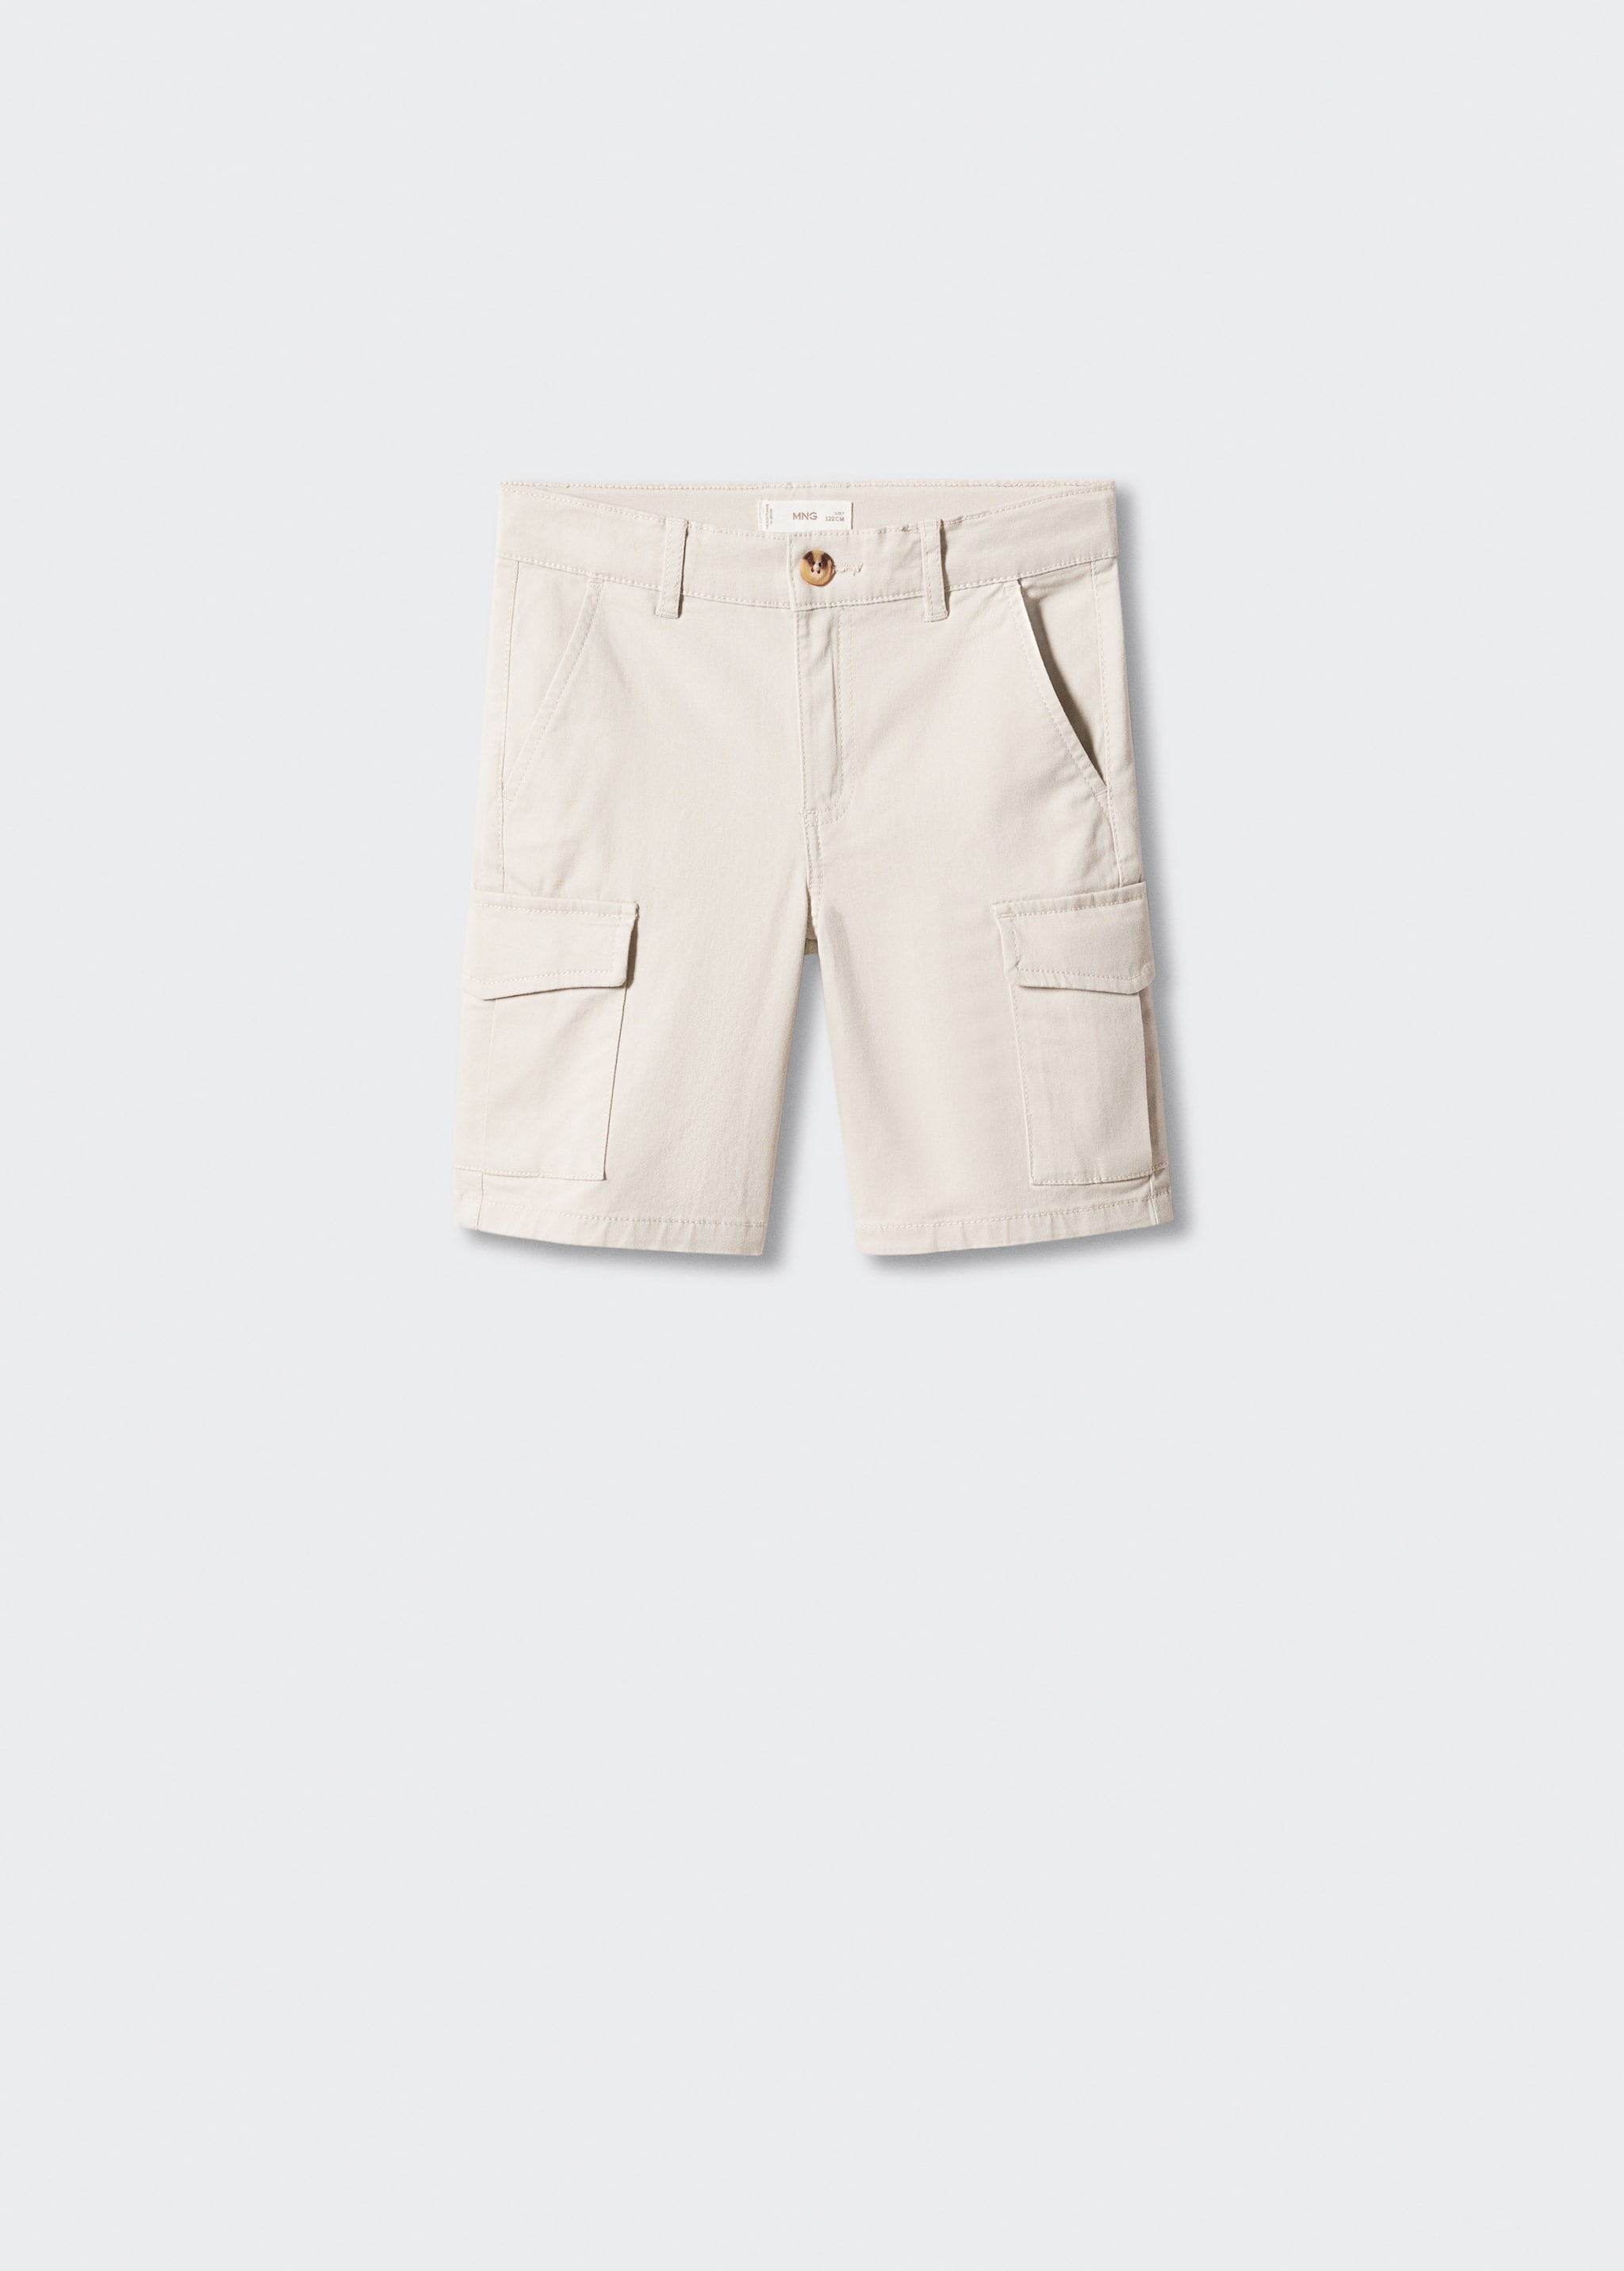 Cargo Bermuda shorts - Article without model